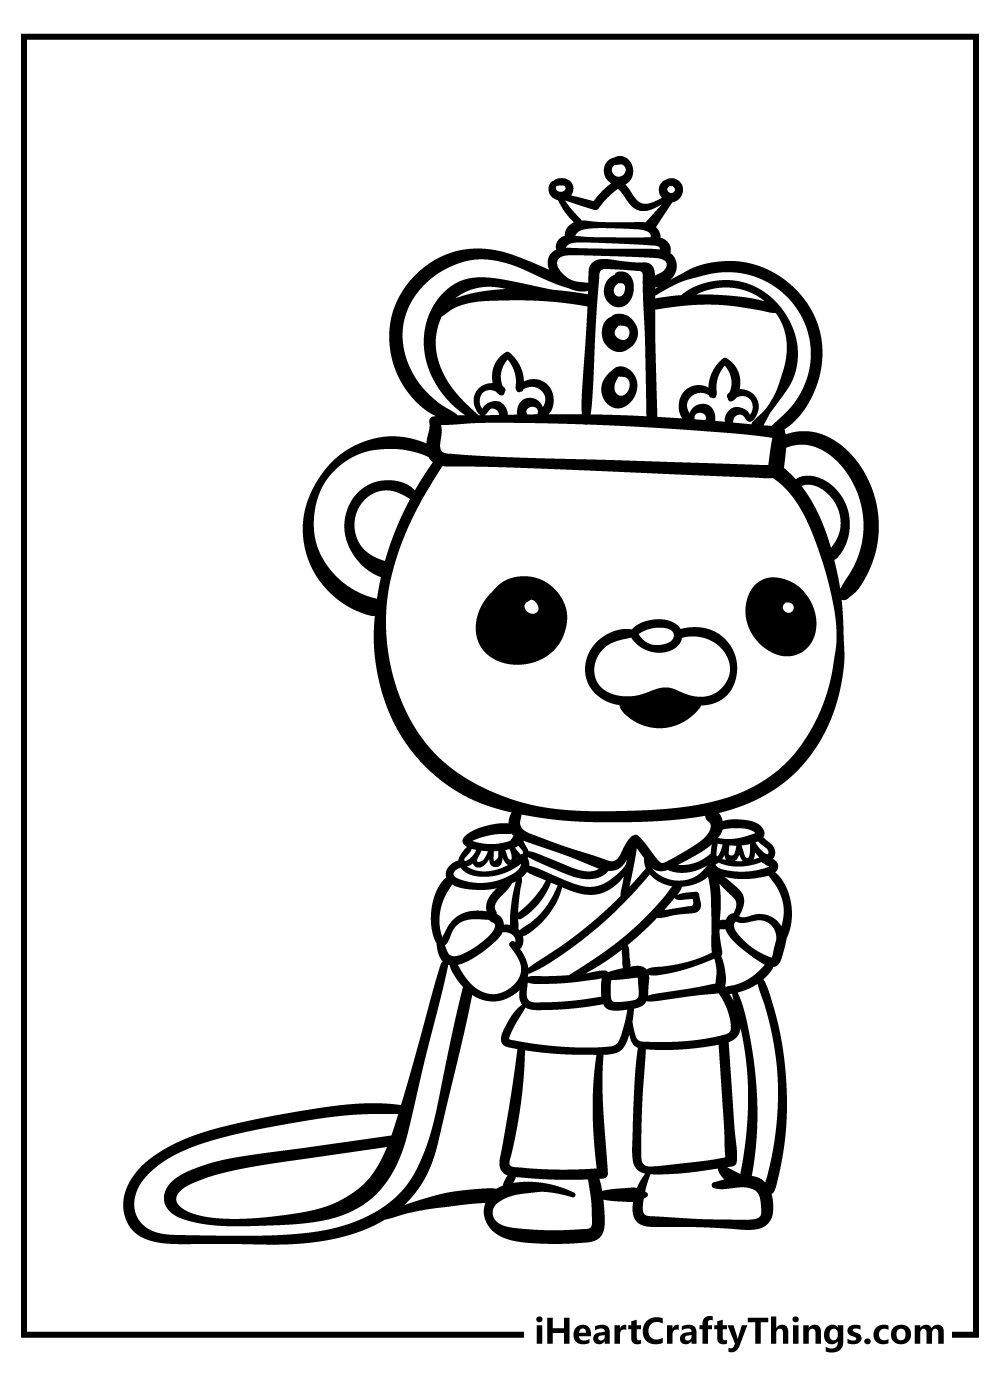 Octonauts coloring pages free printables